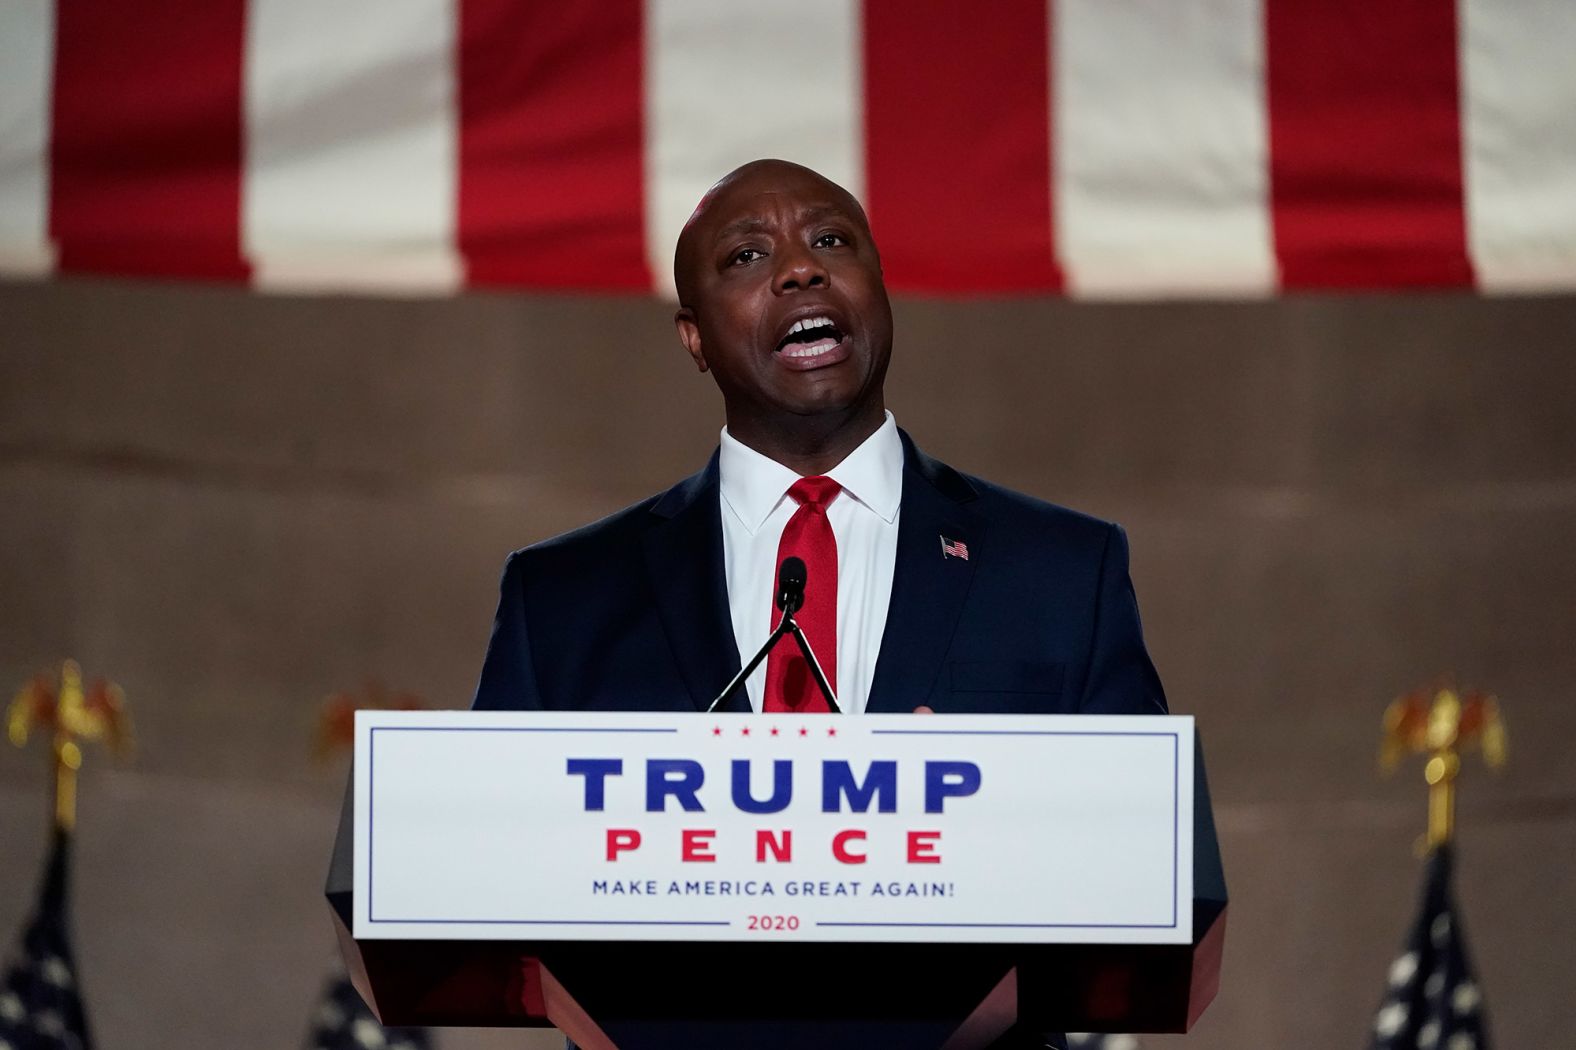 US Sen. Tim Scott delivers the closing speech Monday on the first night of the convention. The South Carolina lawmaker argued that Joe Biden has taken Black voters for granted. Scott, who has called some of the President's tweets "indefensible" and "racially offensive," <a href="https://www.cnn.com/politics/live-news/rnc-2020-day-1/h_edba03315b5b836fcdbbc5922f91e072" target="_blank">also criticized cancel culture</a> and boasted the economic opportunities for minorities he said were made possible by Trump and the Republican agenda.